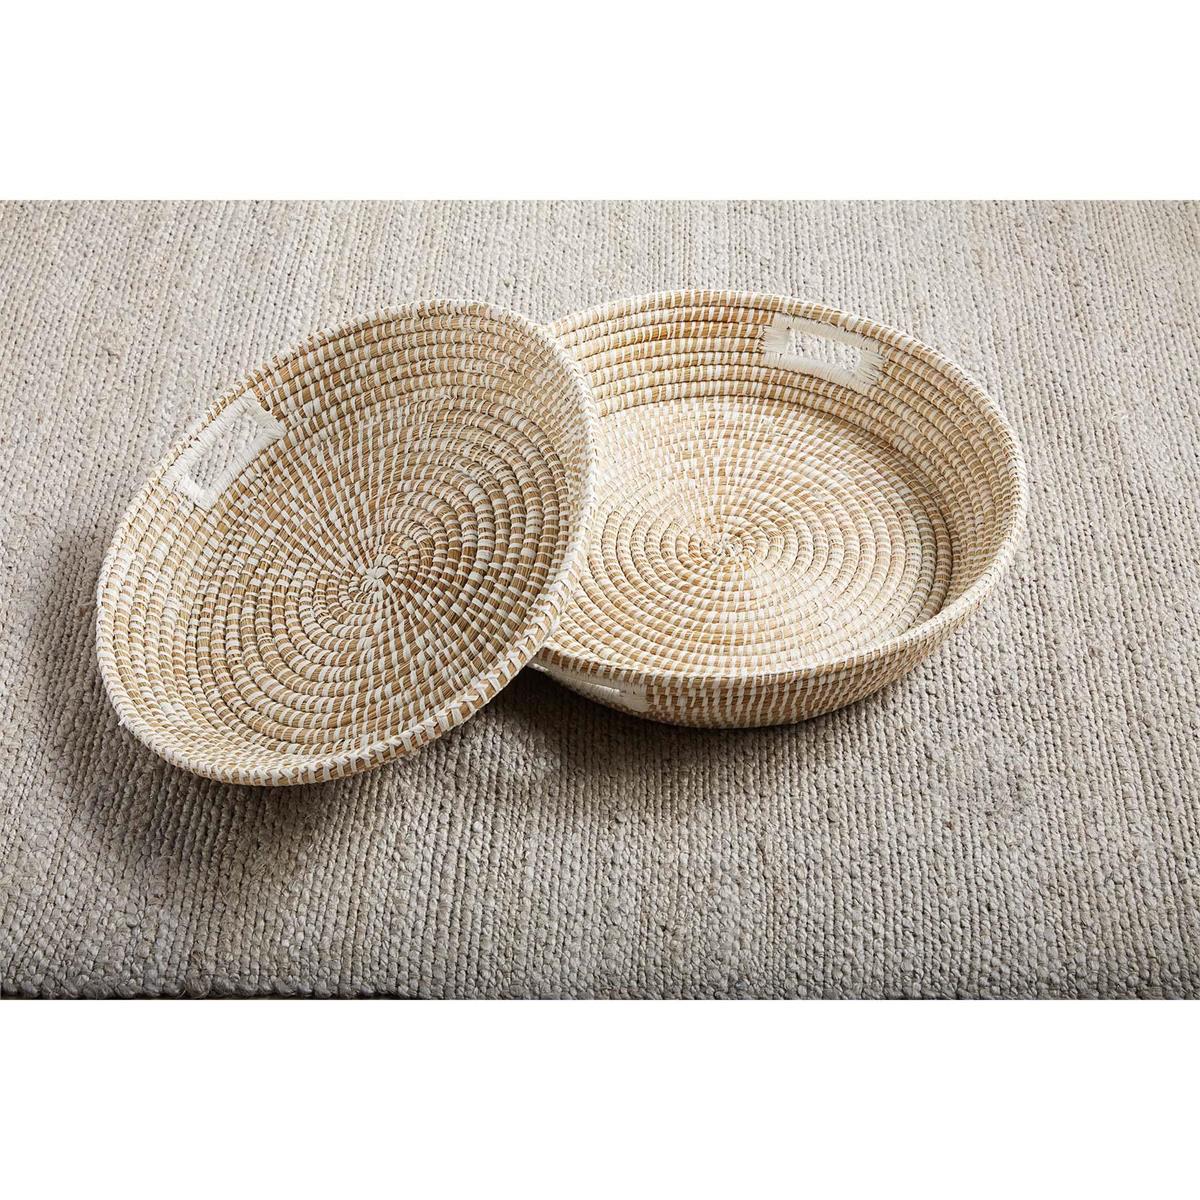 Seagrass Tray 2 sizes